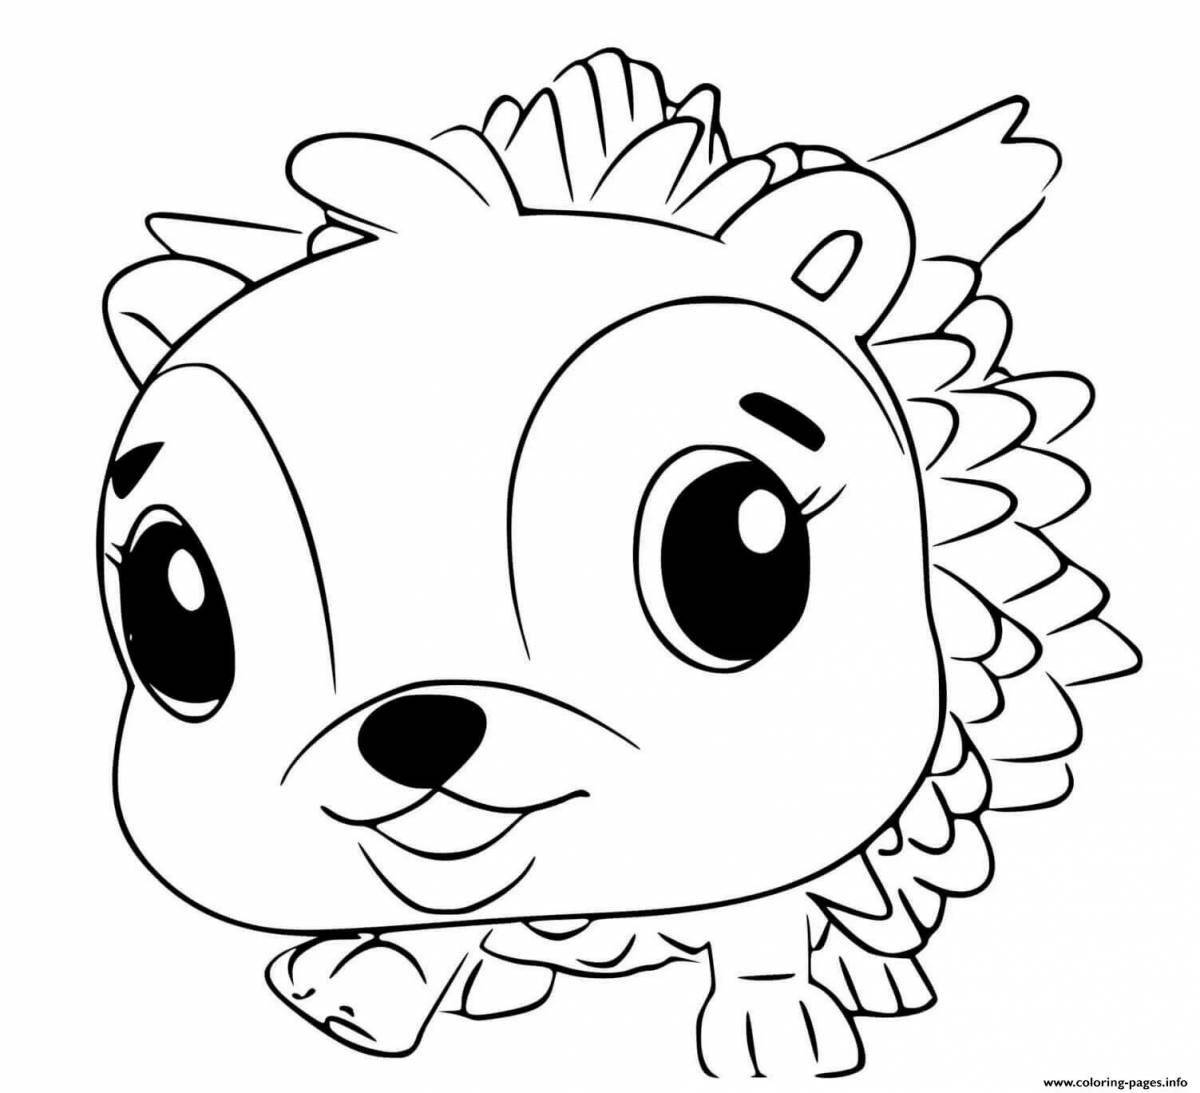 Sweet hechimola coloring page